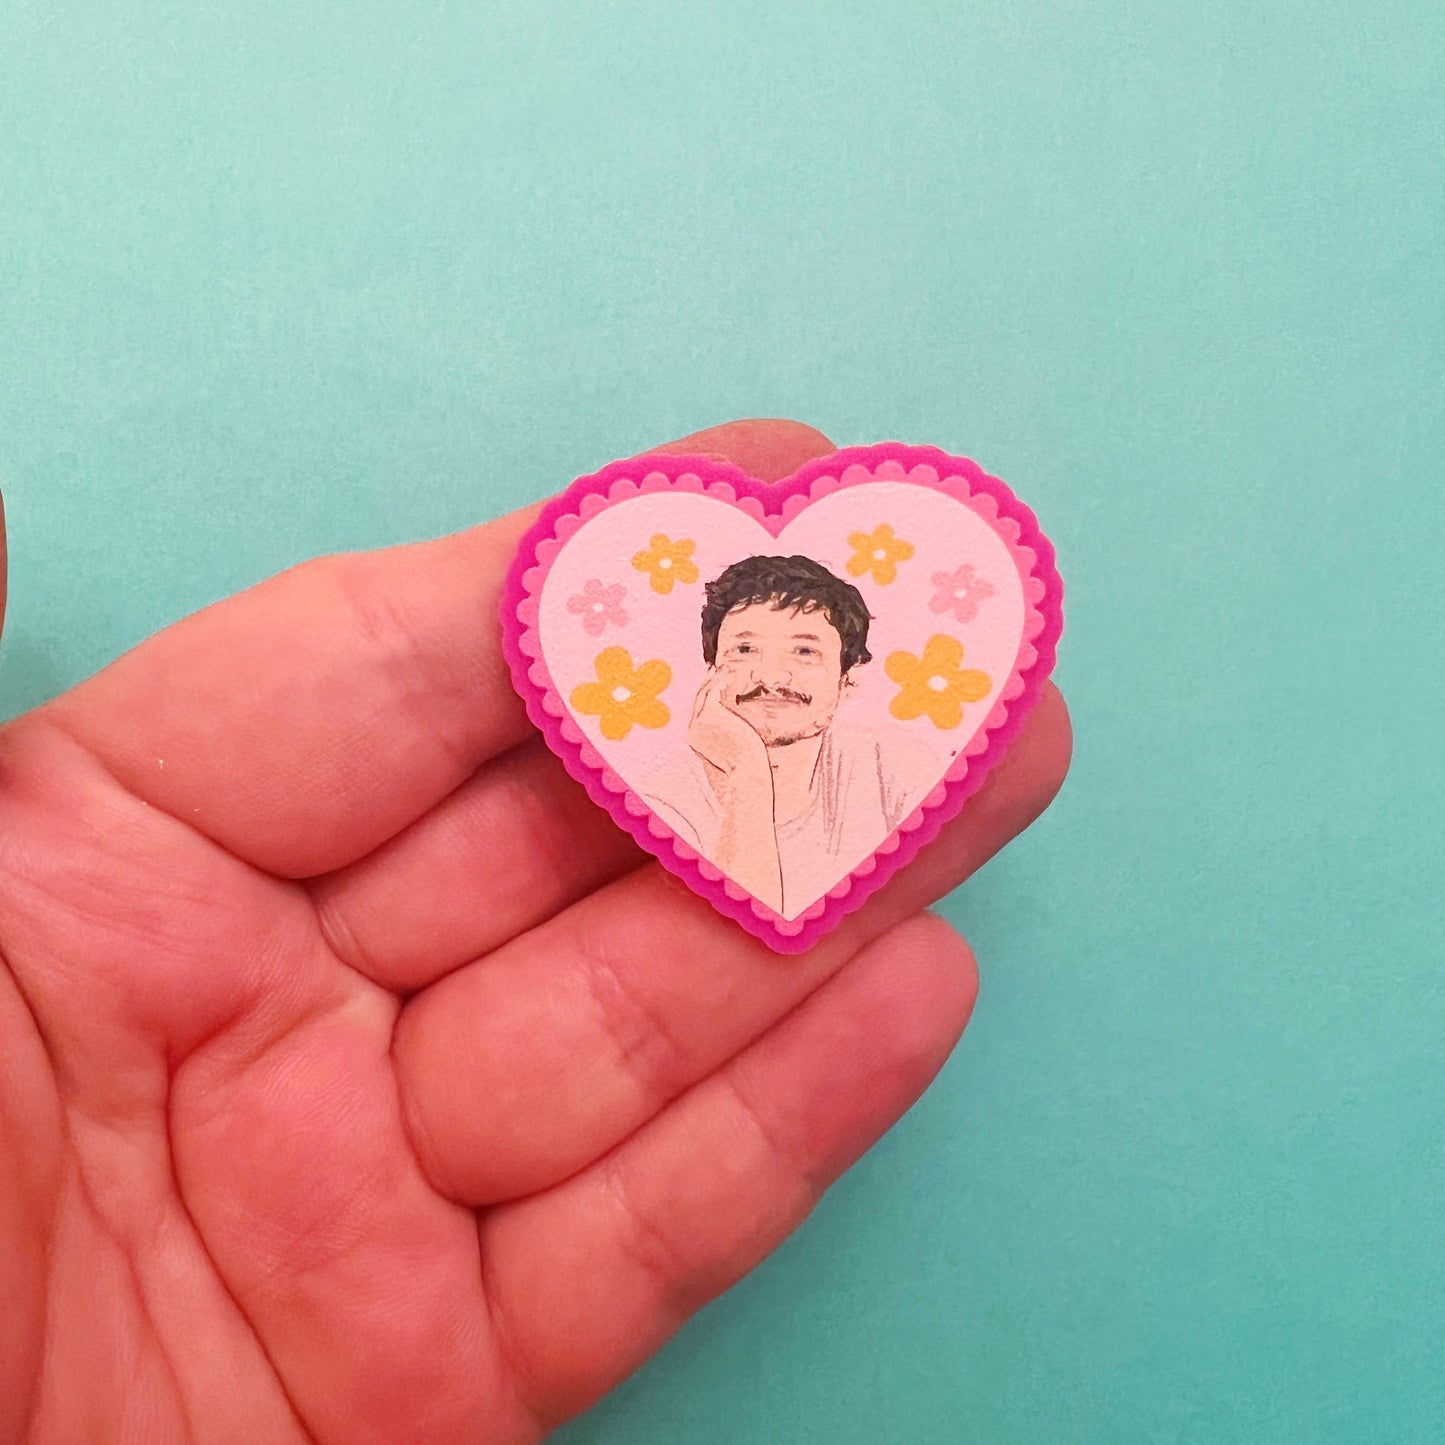 Pedro Pascal Floral Heart Pin Brooch